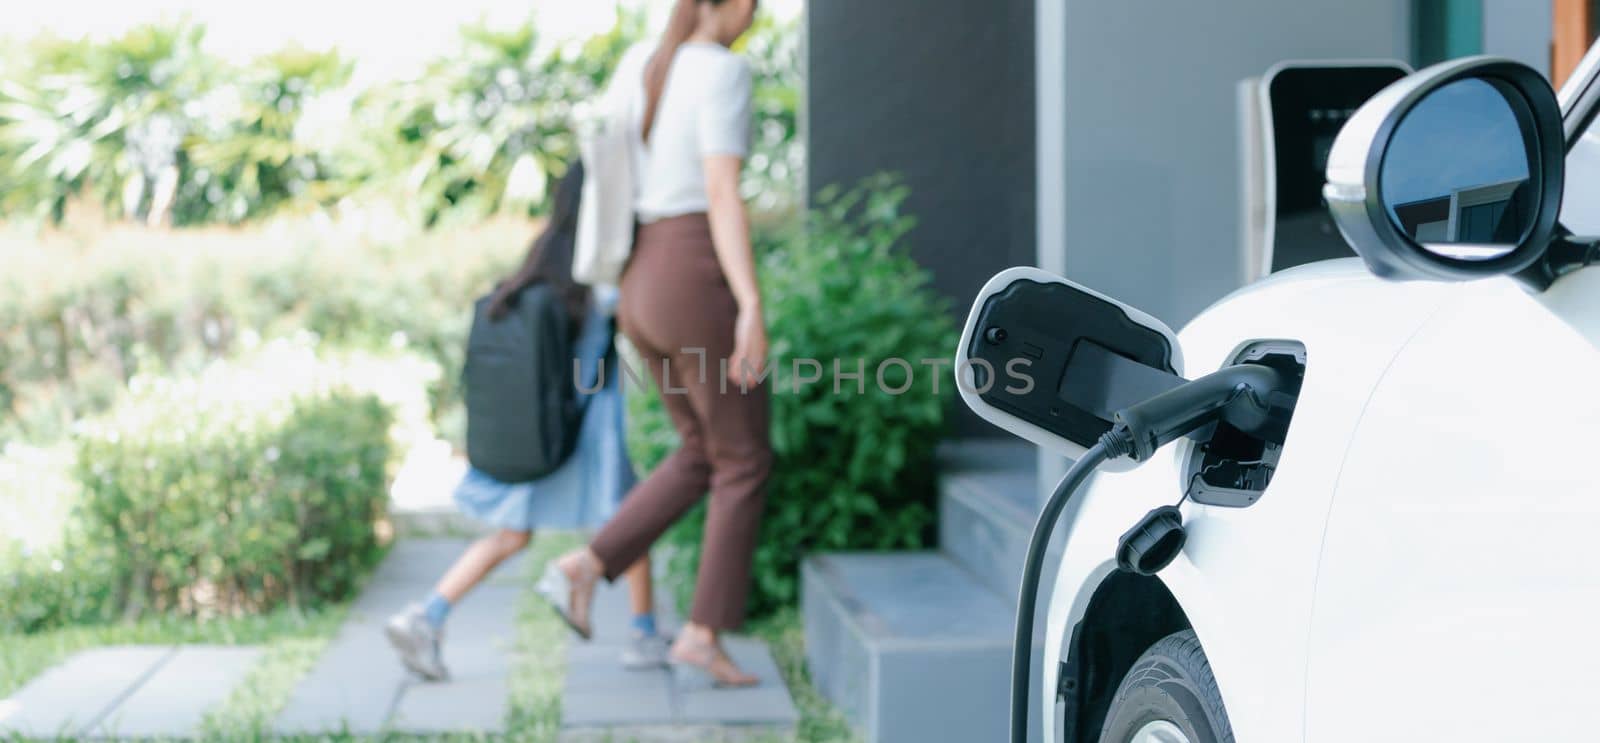 Focus electric vehicle recharging at home charging station plugged in with EV charger device with blurred background of progressive mother and daughter walking as concept for sustainability of energy.